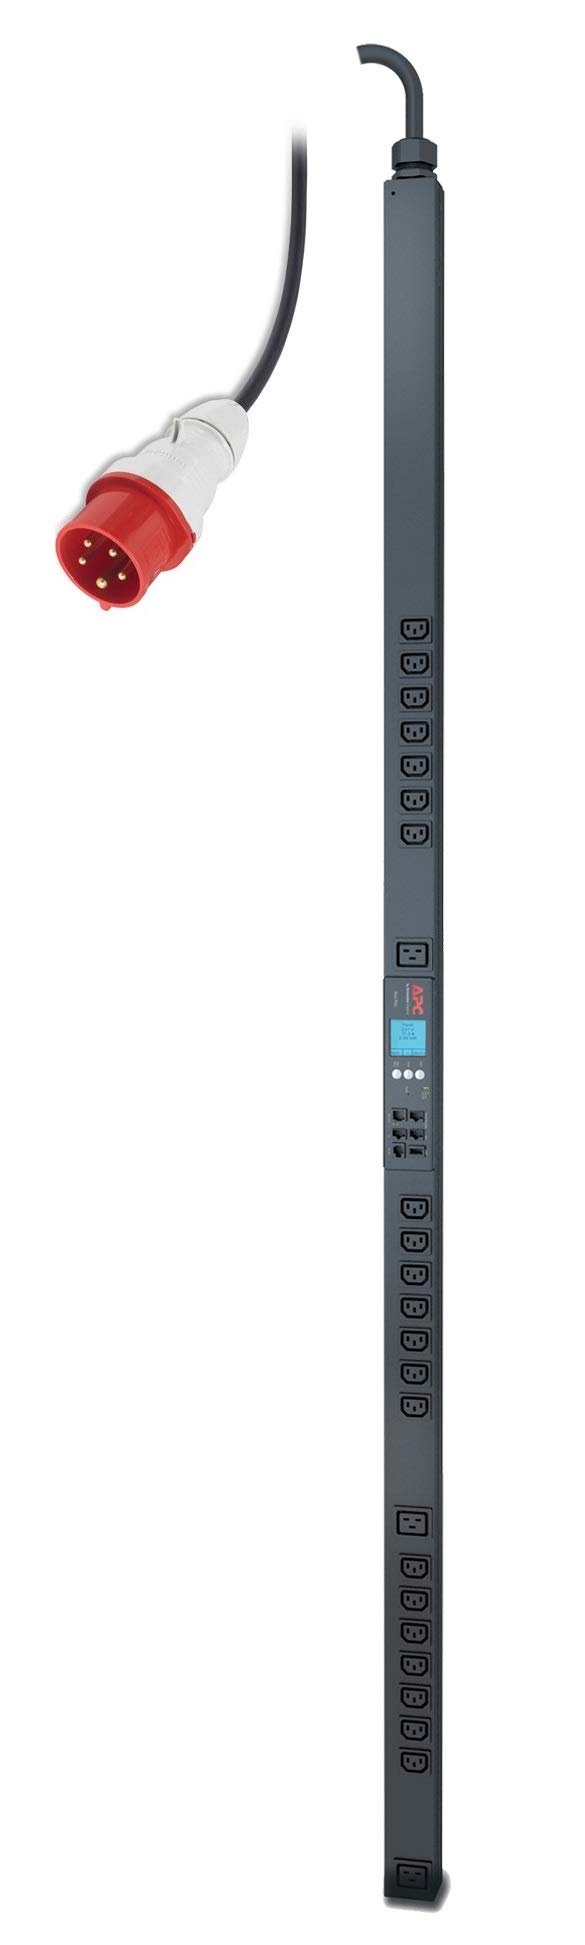 RACK PDU 2G METERED-BY-OUTLET